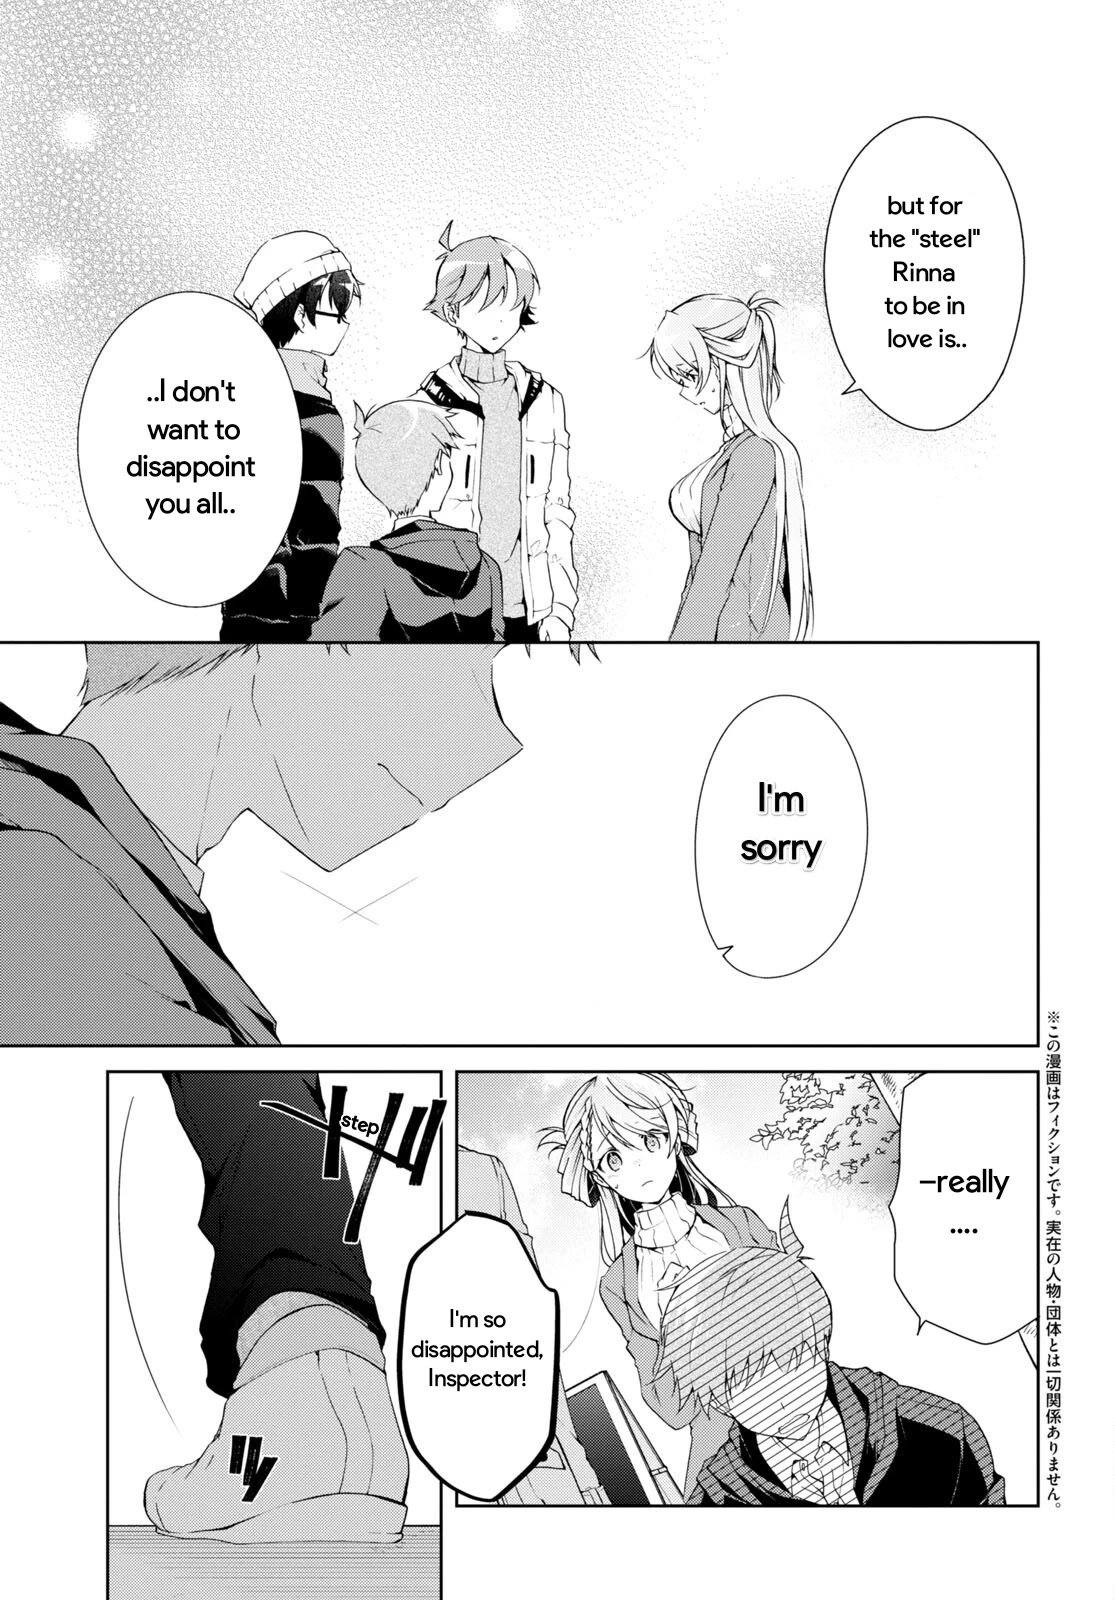 Isshiki-san Wants to Know About Love. - chapter 24.2 - #2